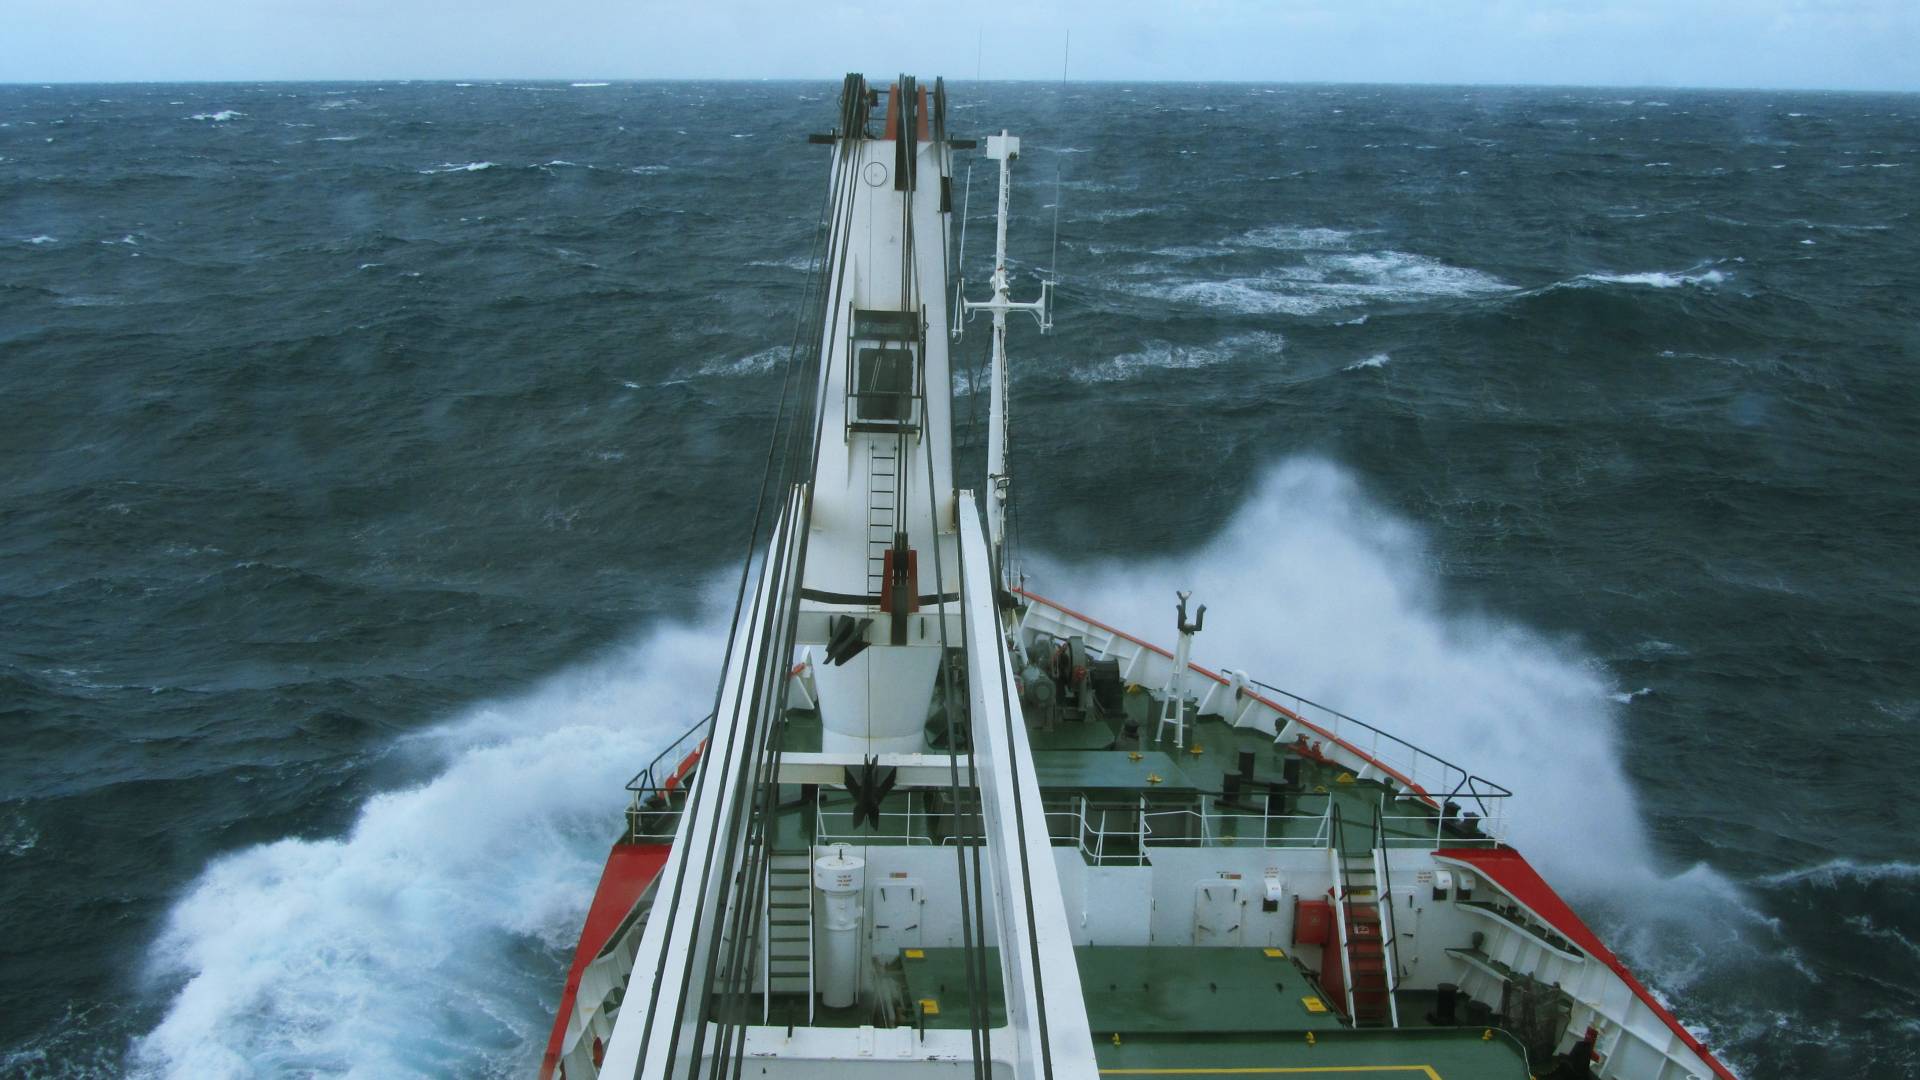 A research vessel plows through choppy water off the coast of South Africa